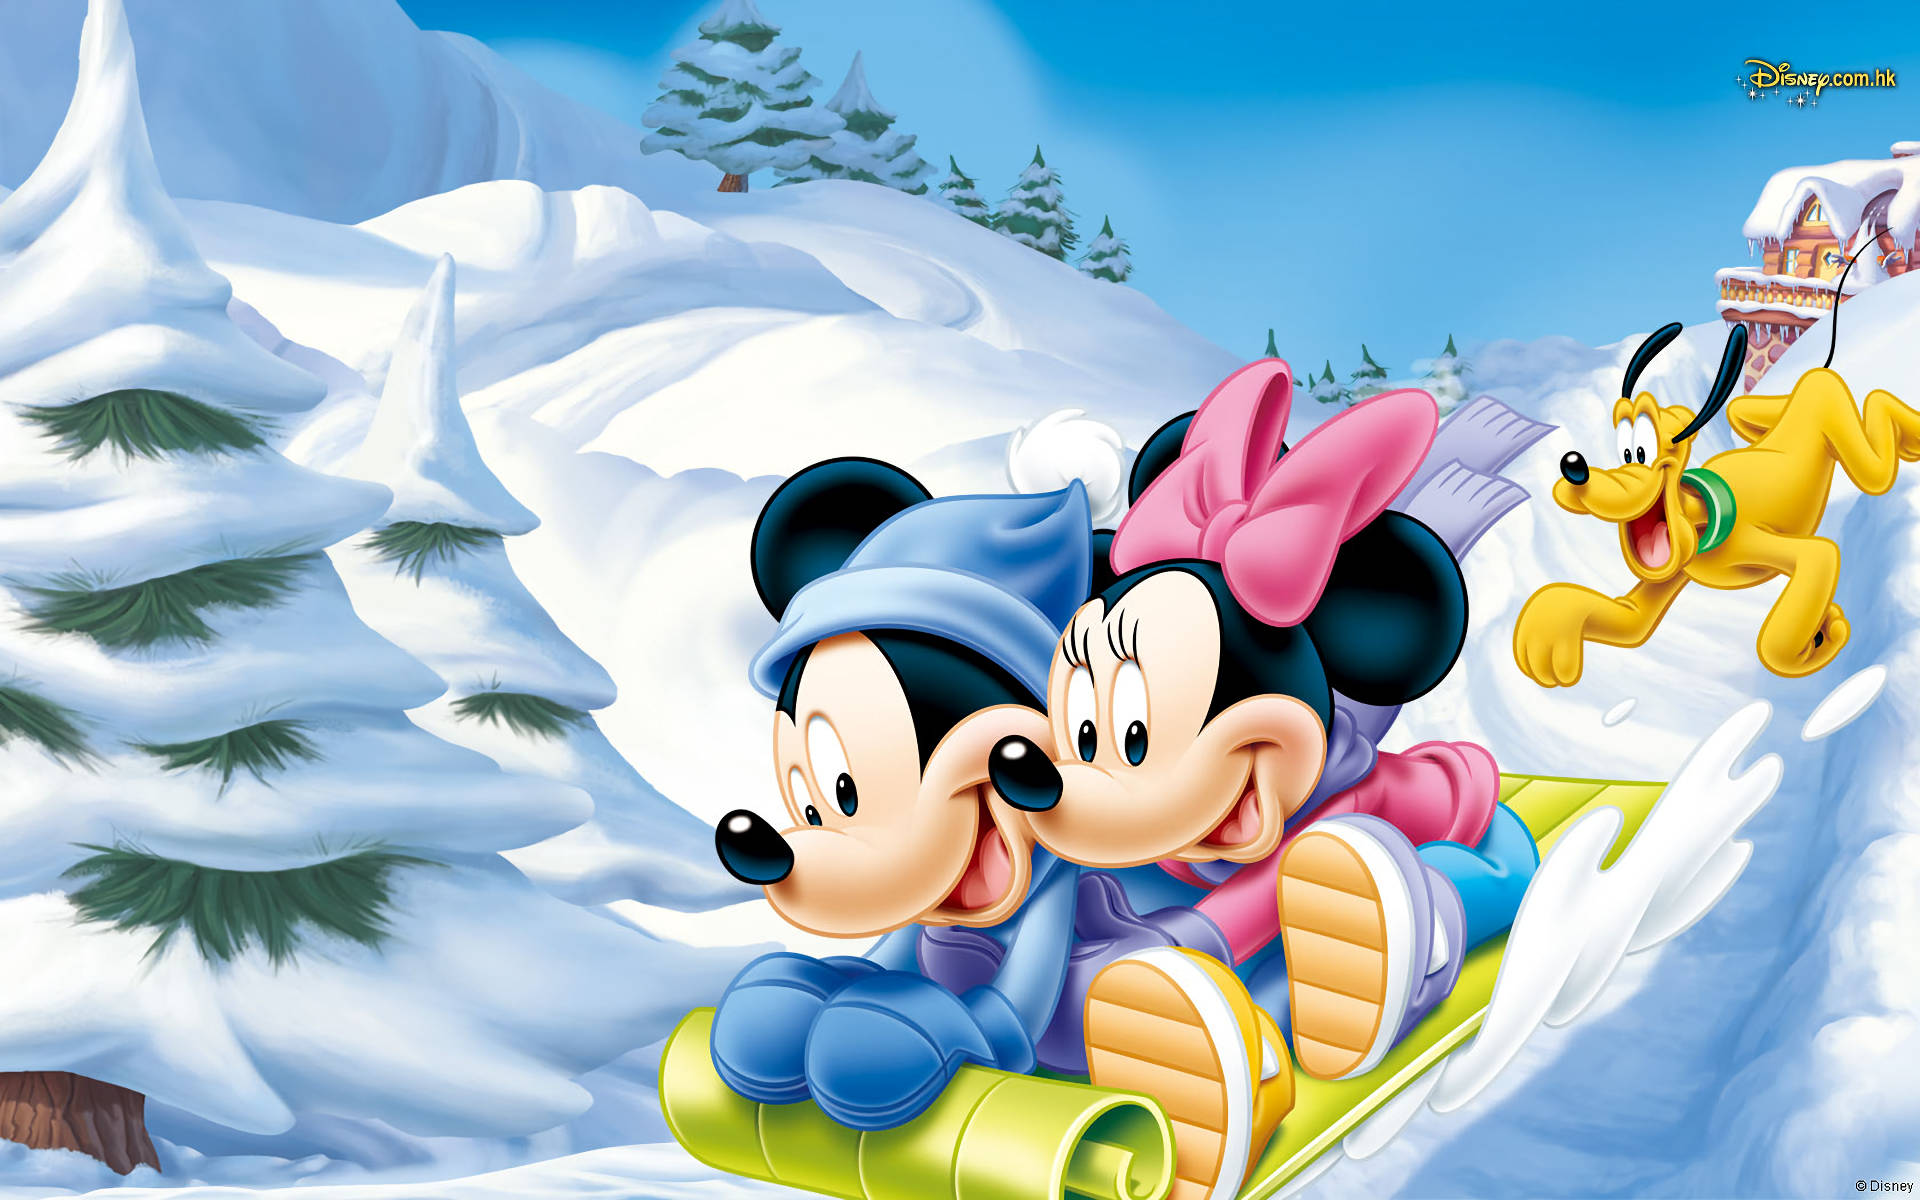 Disney characters playing in snow wallpaper